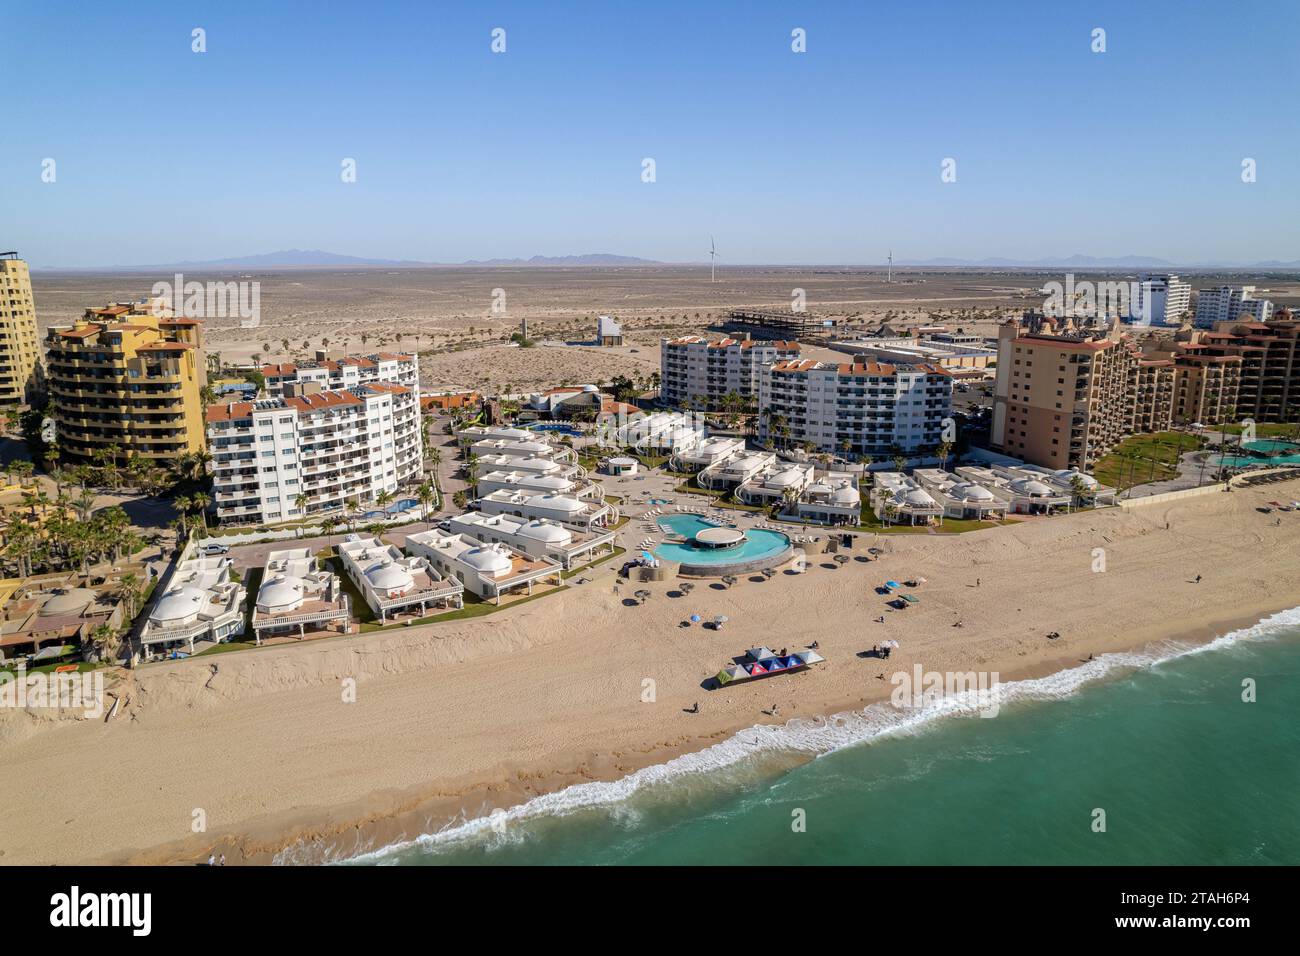 An aerial view of hotels on the sandy beach in Puerto Penasco, Sonora, Mexico Stock Photo